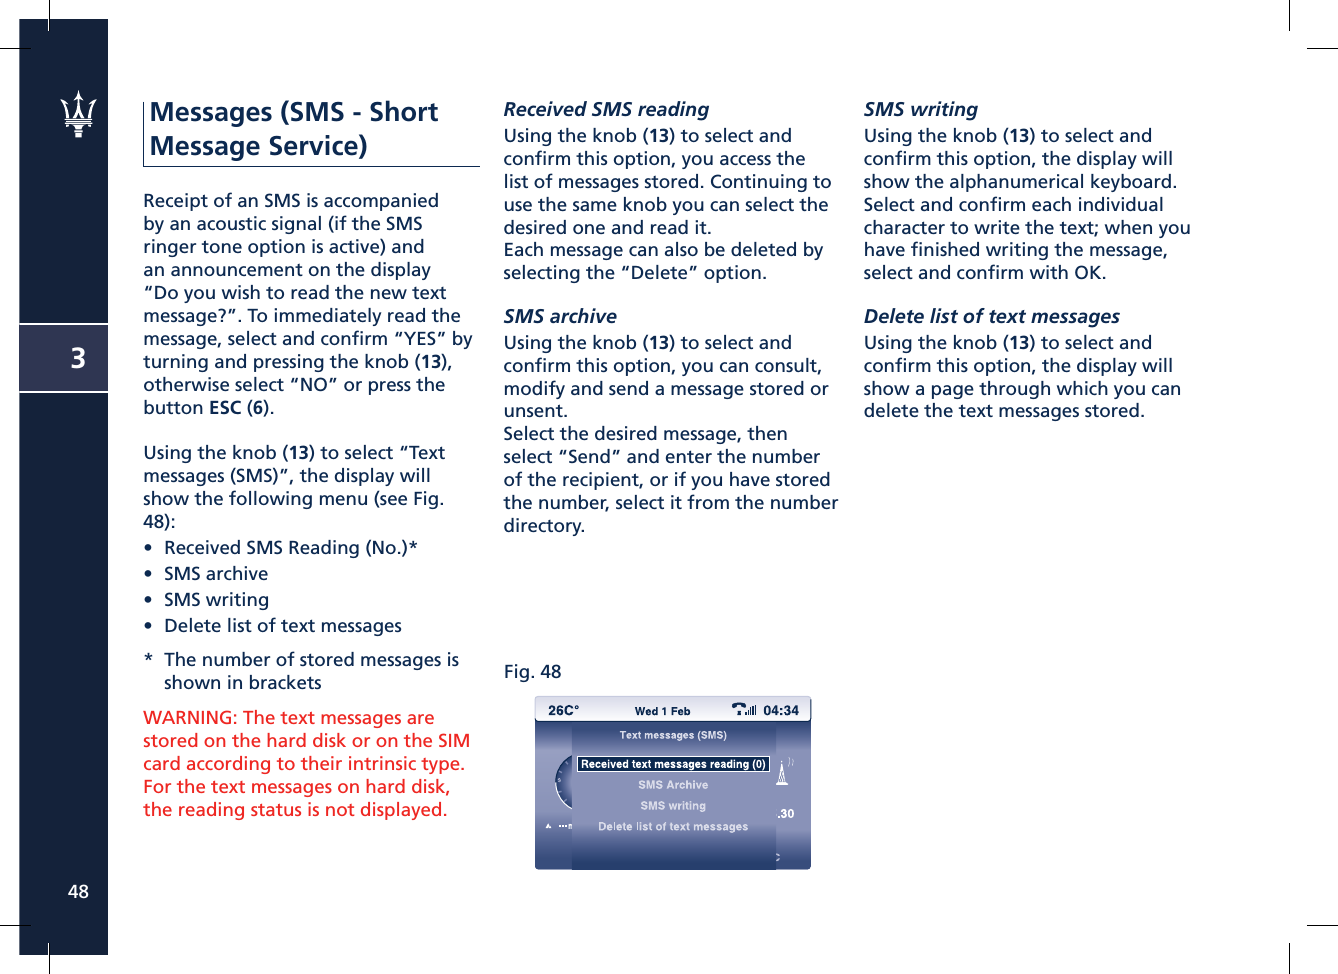 Fig. 48348Messages (SMS - Short Message Service)Receipt of an SMS is accompanied by an acoustic signal (if the SMS ringer tone option is active) and an announcement on the display “Do you wish to read the new text message?”. To immediately read the message, select and conﬁ rm “YES” by turning and pressing the knob (13), otherwise select “NO” or press the button ESC (6).Using the knob (13) to select “Text messages (SMS)”, the display will show the following menu (see Fig. 48):•  Received SMS Reading (No.)*•  SMS archive•  SMS writing•  Delete list of text messages*  The number of stored messages is shown in bracketsWARNING: The text messages are stored on the hard disk or on the SIM card according to their intrinsic type.For the text messages on hard disk, the reading status is not displayed.Received SMS readingUsing the knob (13) to select and conﬁ rm this option, you access the list of messages stored. Continuing to use the same knob you can select the desired one and read it.Each message can also be deleted by selecting the “Delete” option.SMS archiveUsing the knob (13) to select and conﬁ rm this option, you can consult, modify and send a message stored or unsent.Select the desired message, then select “Send” and enter the number of the recipient, or if you have stored the number, select it from the number directory.SMS writingUsing the knob (13) to select and conﬁ rm this option, the display will show the alphanumerical keyboard. Select and conﬁ rm each individual character to write the text; when you have ﬁ nished writing the message, select and conﬁ rm with OK.Delete list of text messagesUsing the knob (13) to select and conﬁ rm this option, the display will show a page through which you can delete the text messages stored.